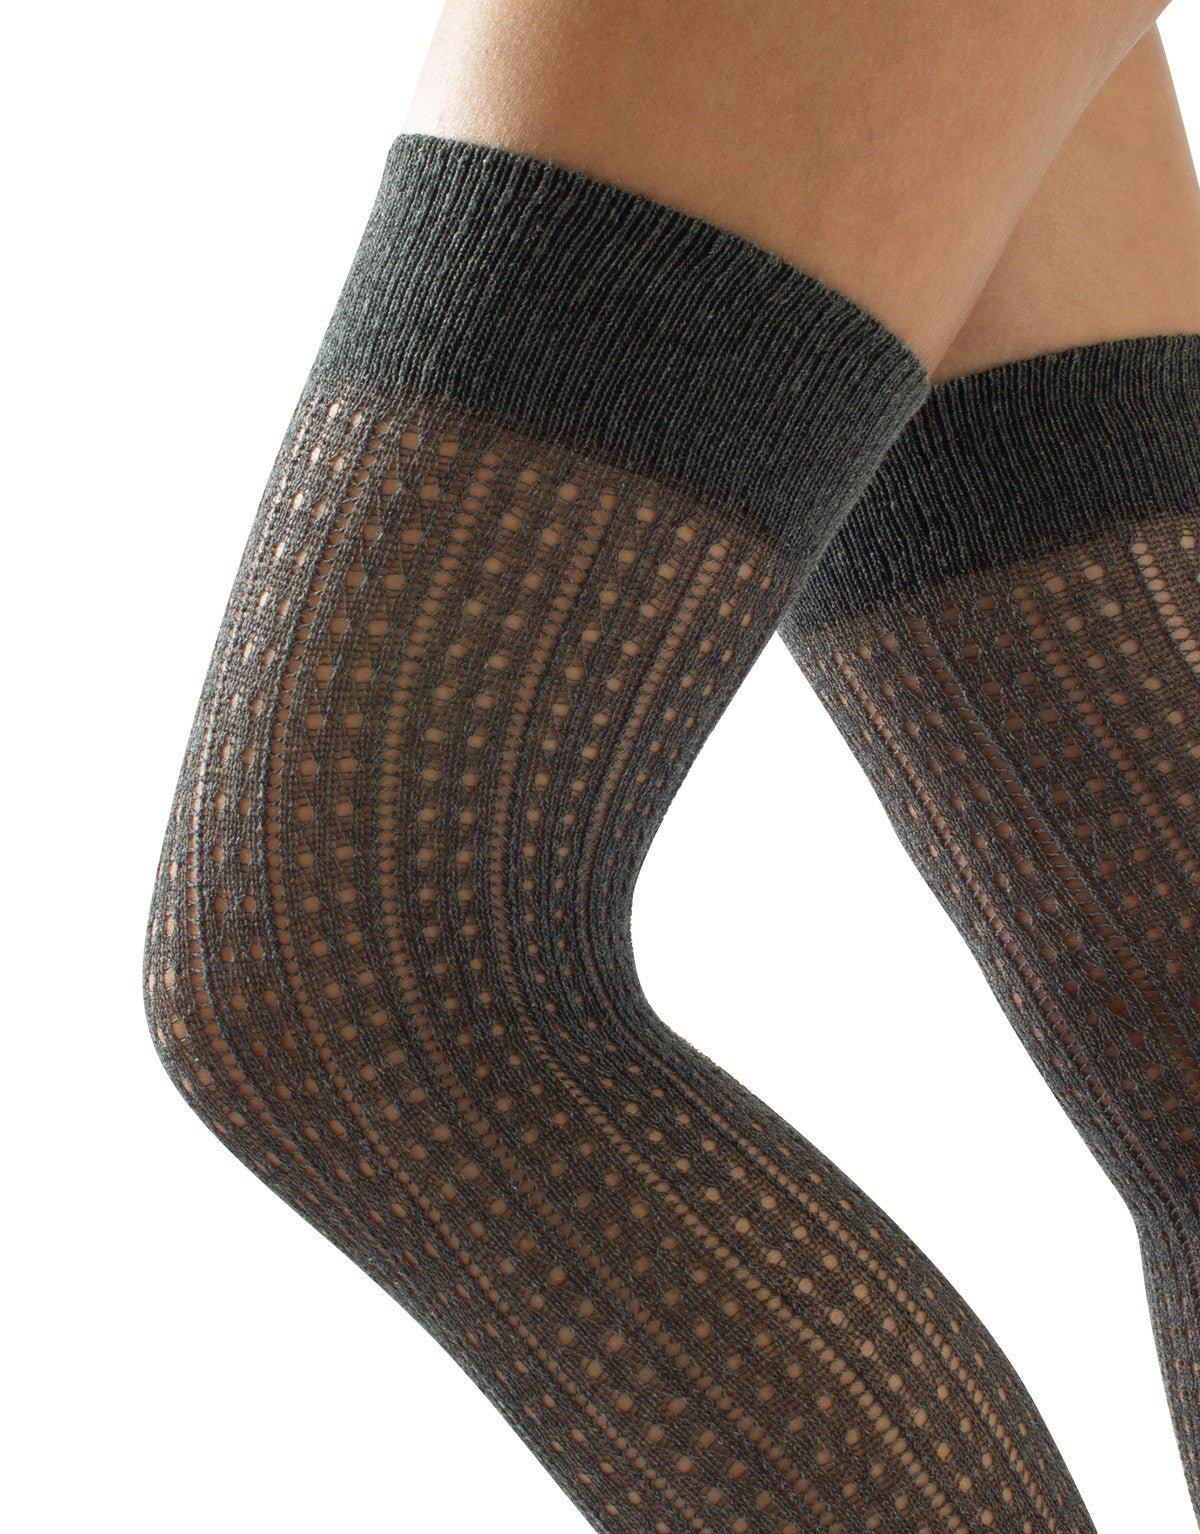 Calzitaly Geometric Over-Knee Socks - Knitted grey over the knee socks with an openwork spotted vertical rib style pattern, plain elasticated cuff and plain toe.